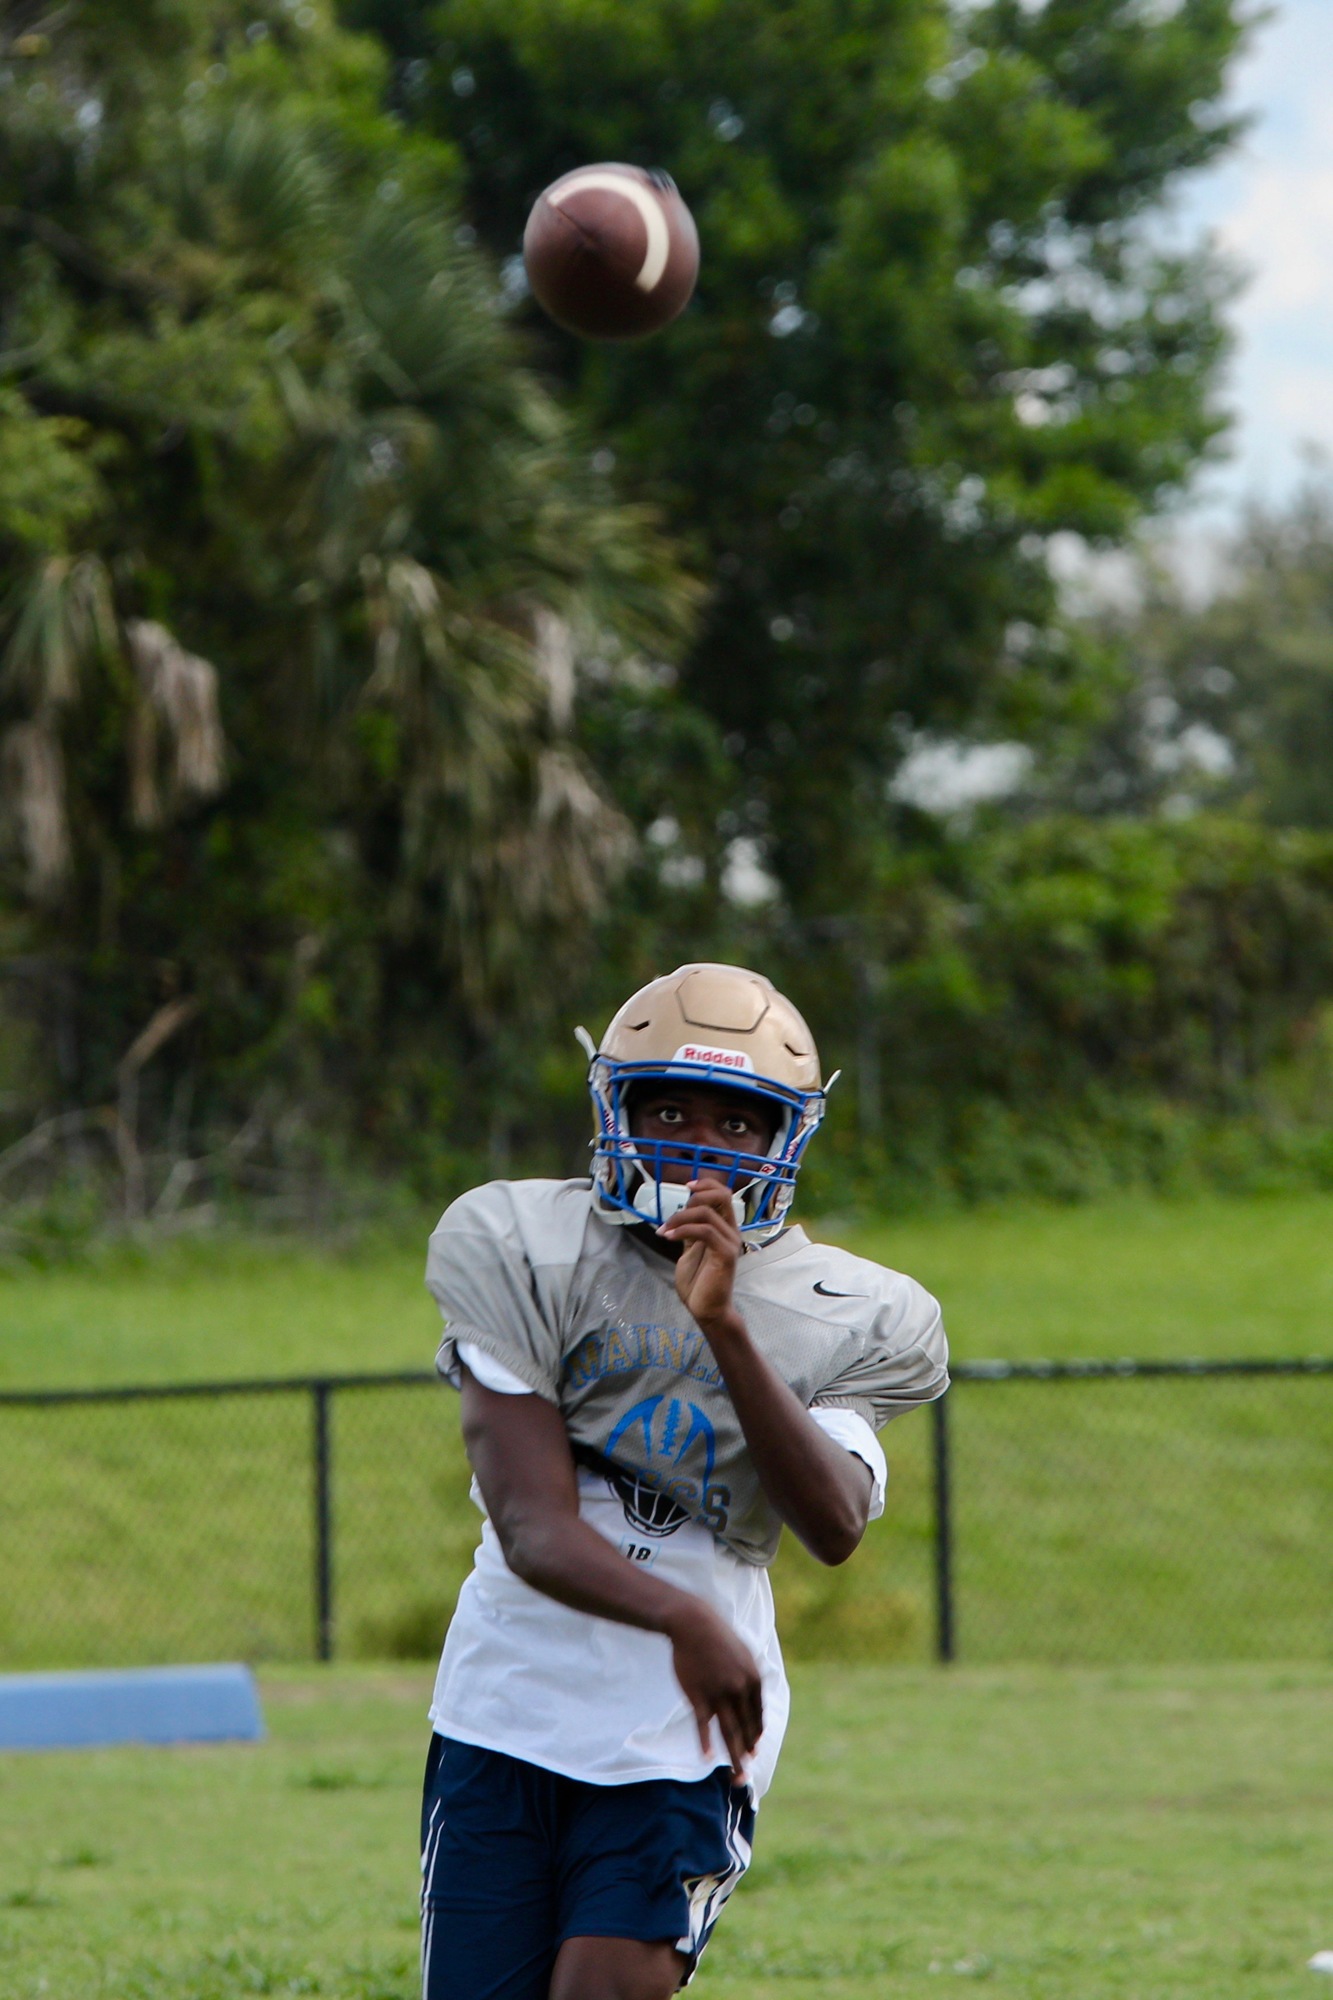 Mainland quarterback Taron Keith throws a ball at practice. Photo by Ray Boone